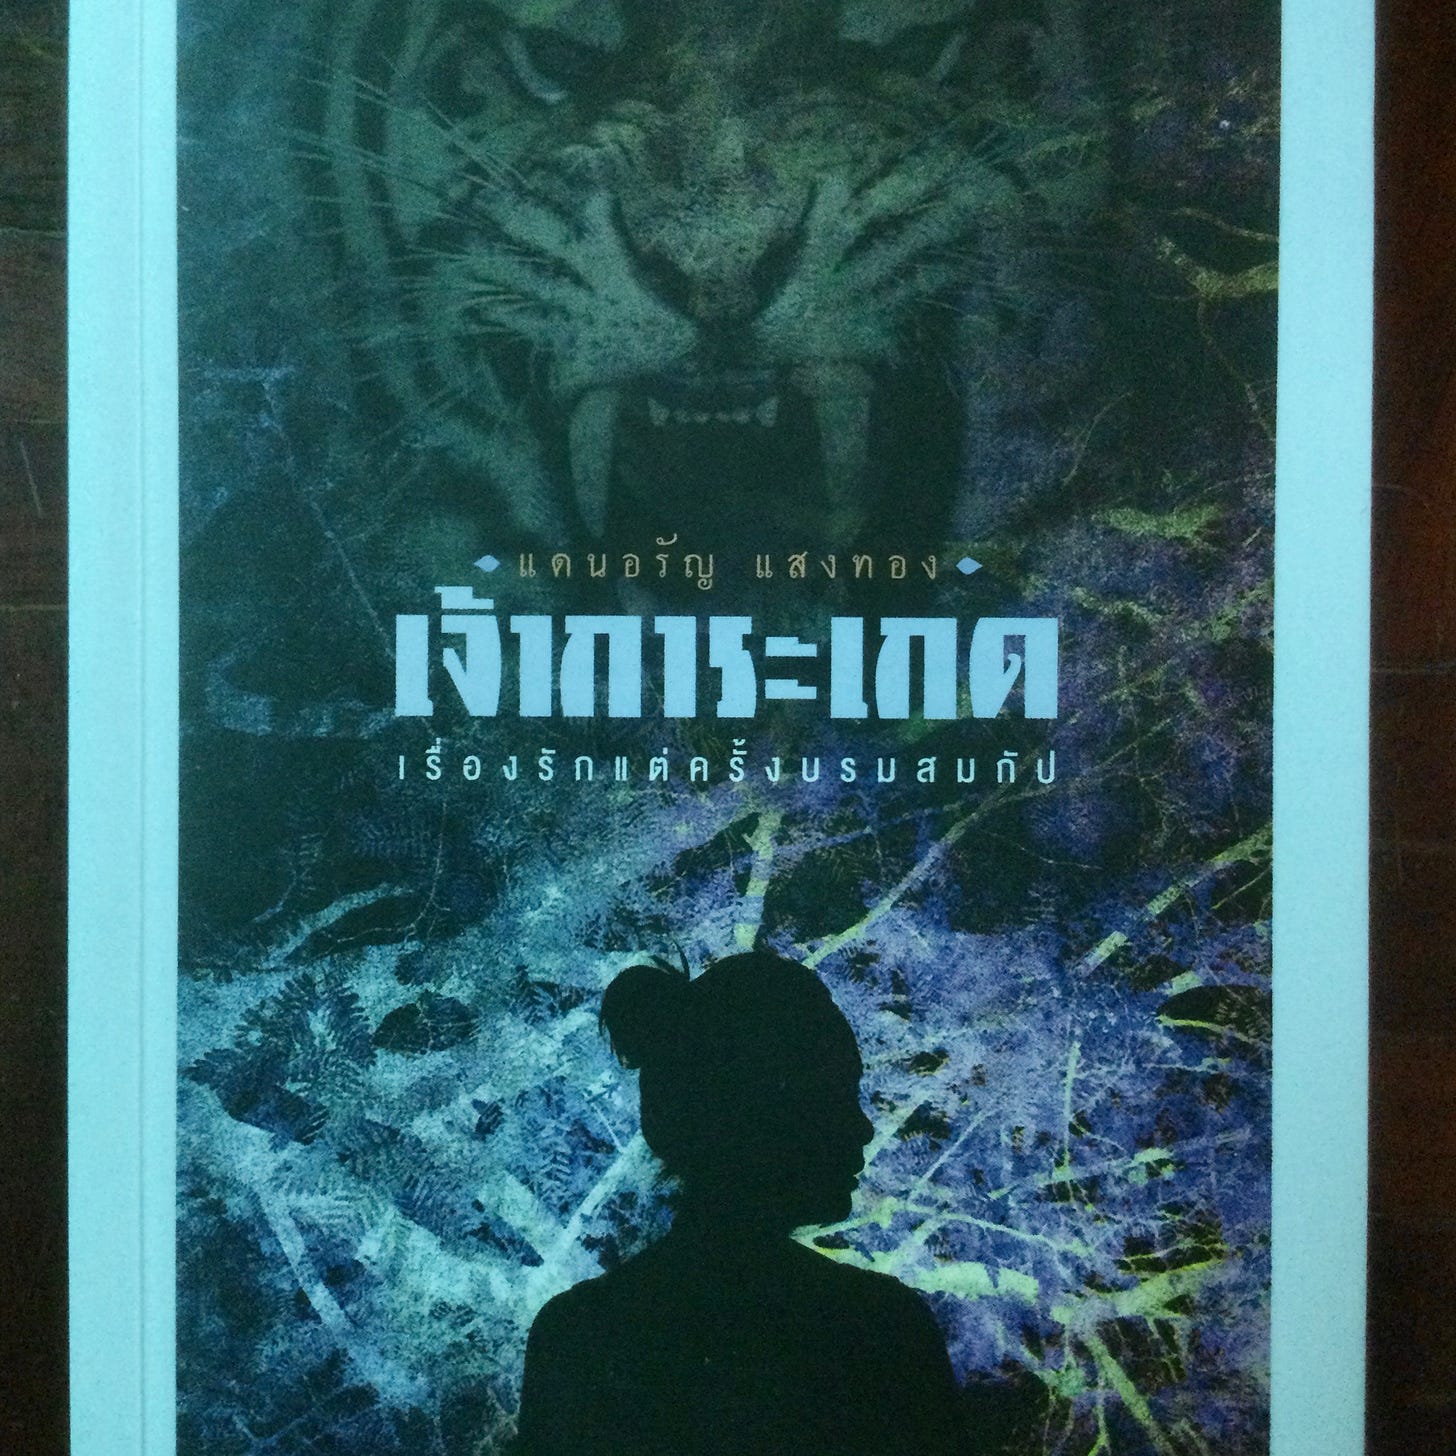 The cover of the Thai language version of the book